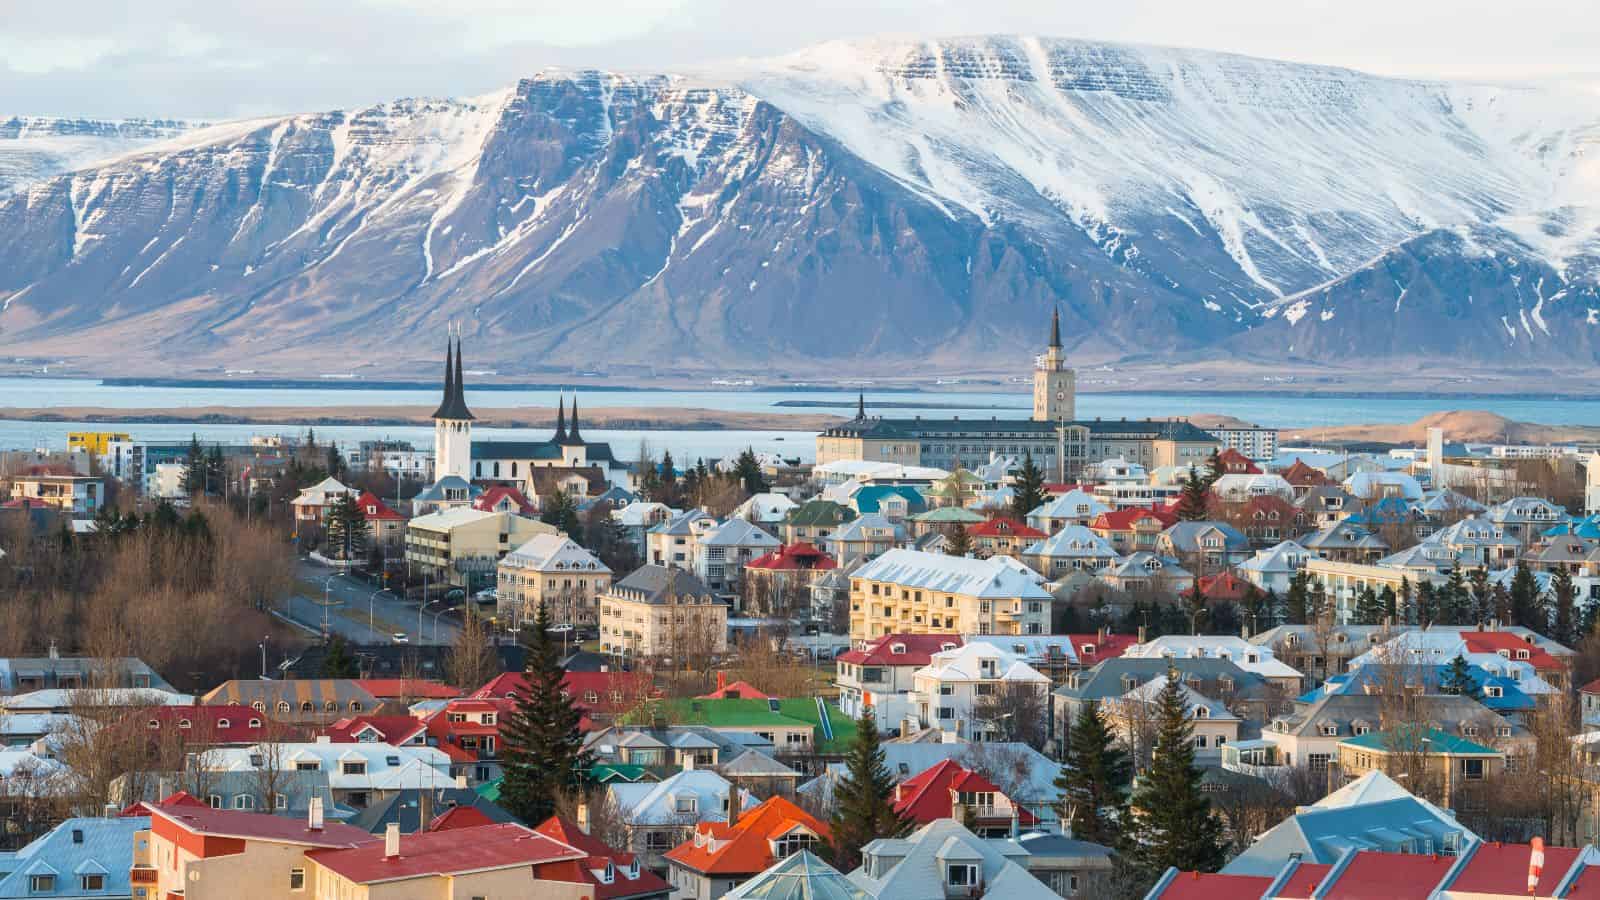 <p>Add Reykjavik to your accessible travel bucket list. <a href="https://whatthefab.com/iceland-attractions.html" rel="follow">Iceland</a> has made a conscious effort to improve wheelchair features throughout its capital city.</p><p>Most shops on Laugavegur, Reykjavik’s central shopping street, have ramps for visitors with mobility concerns. Meanwhile, local companies like Iceland Unlimited offer tours for disabled travelers.</p>